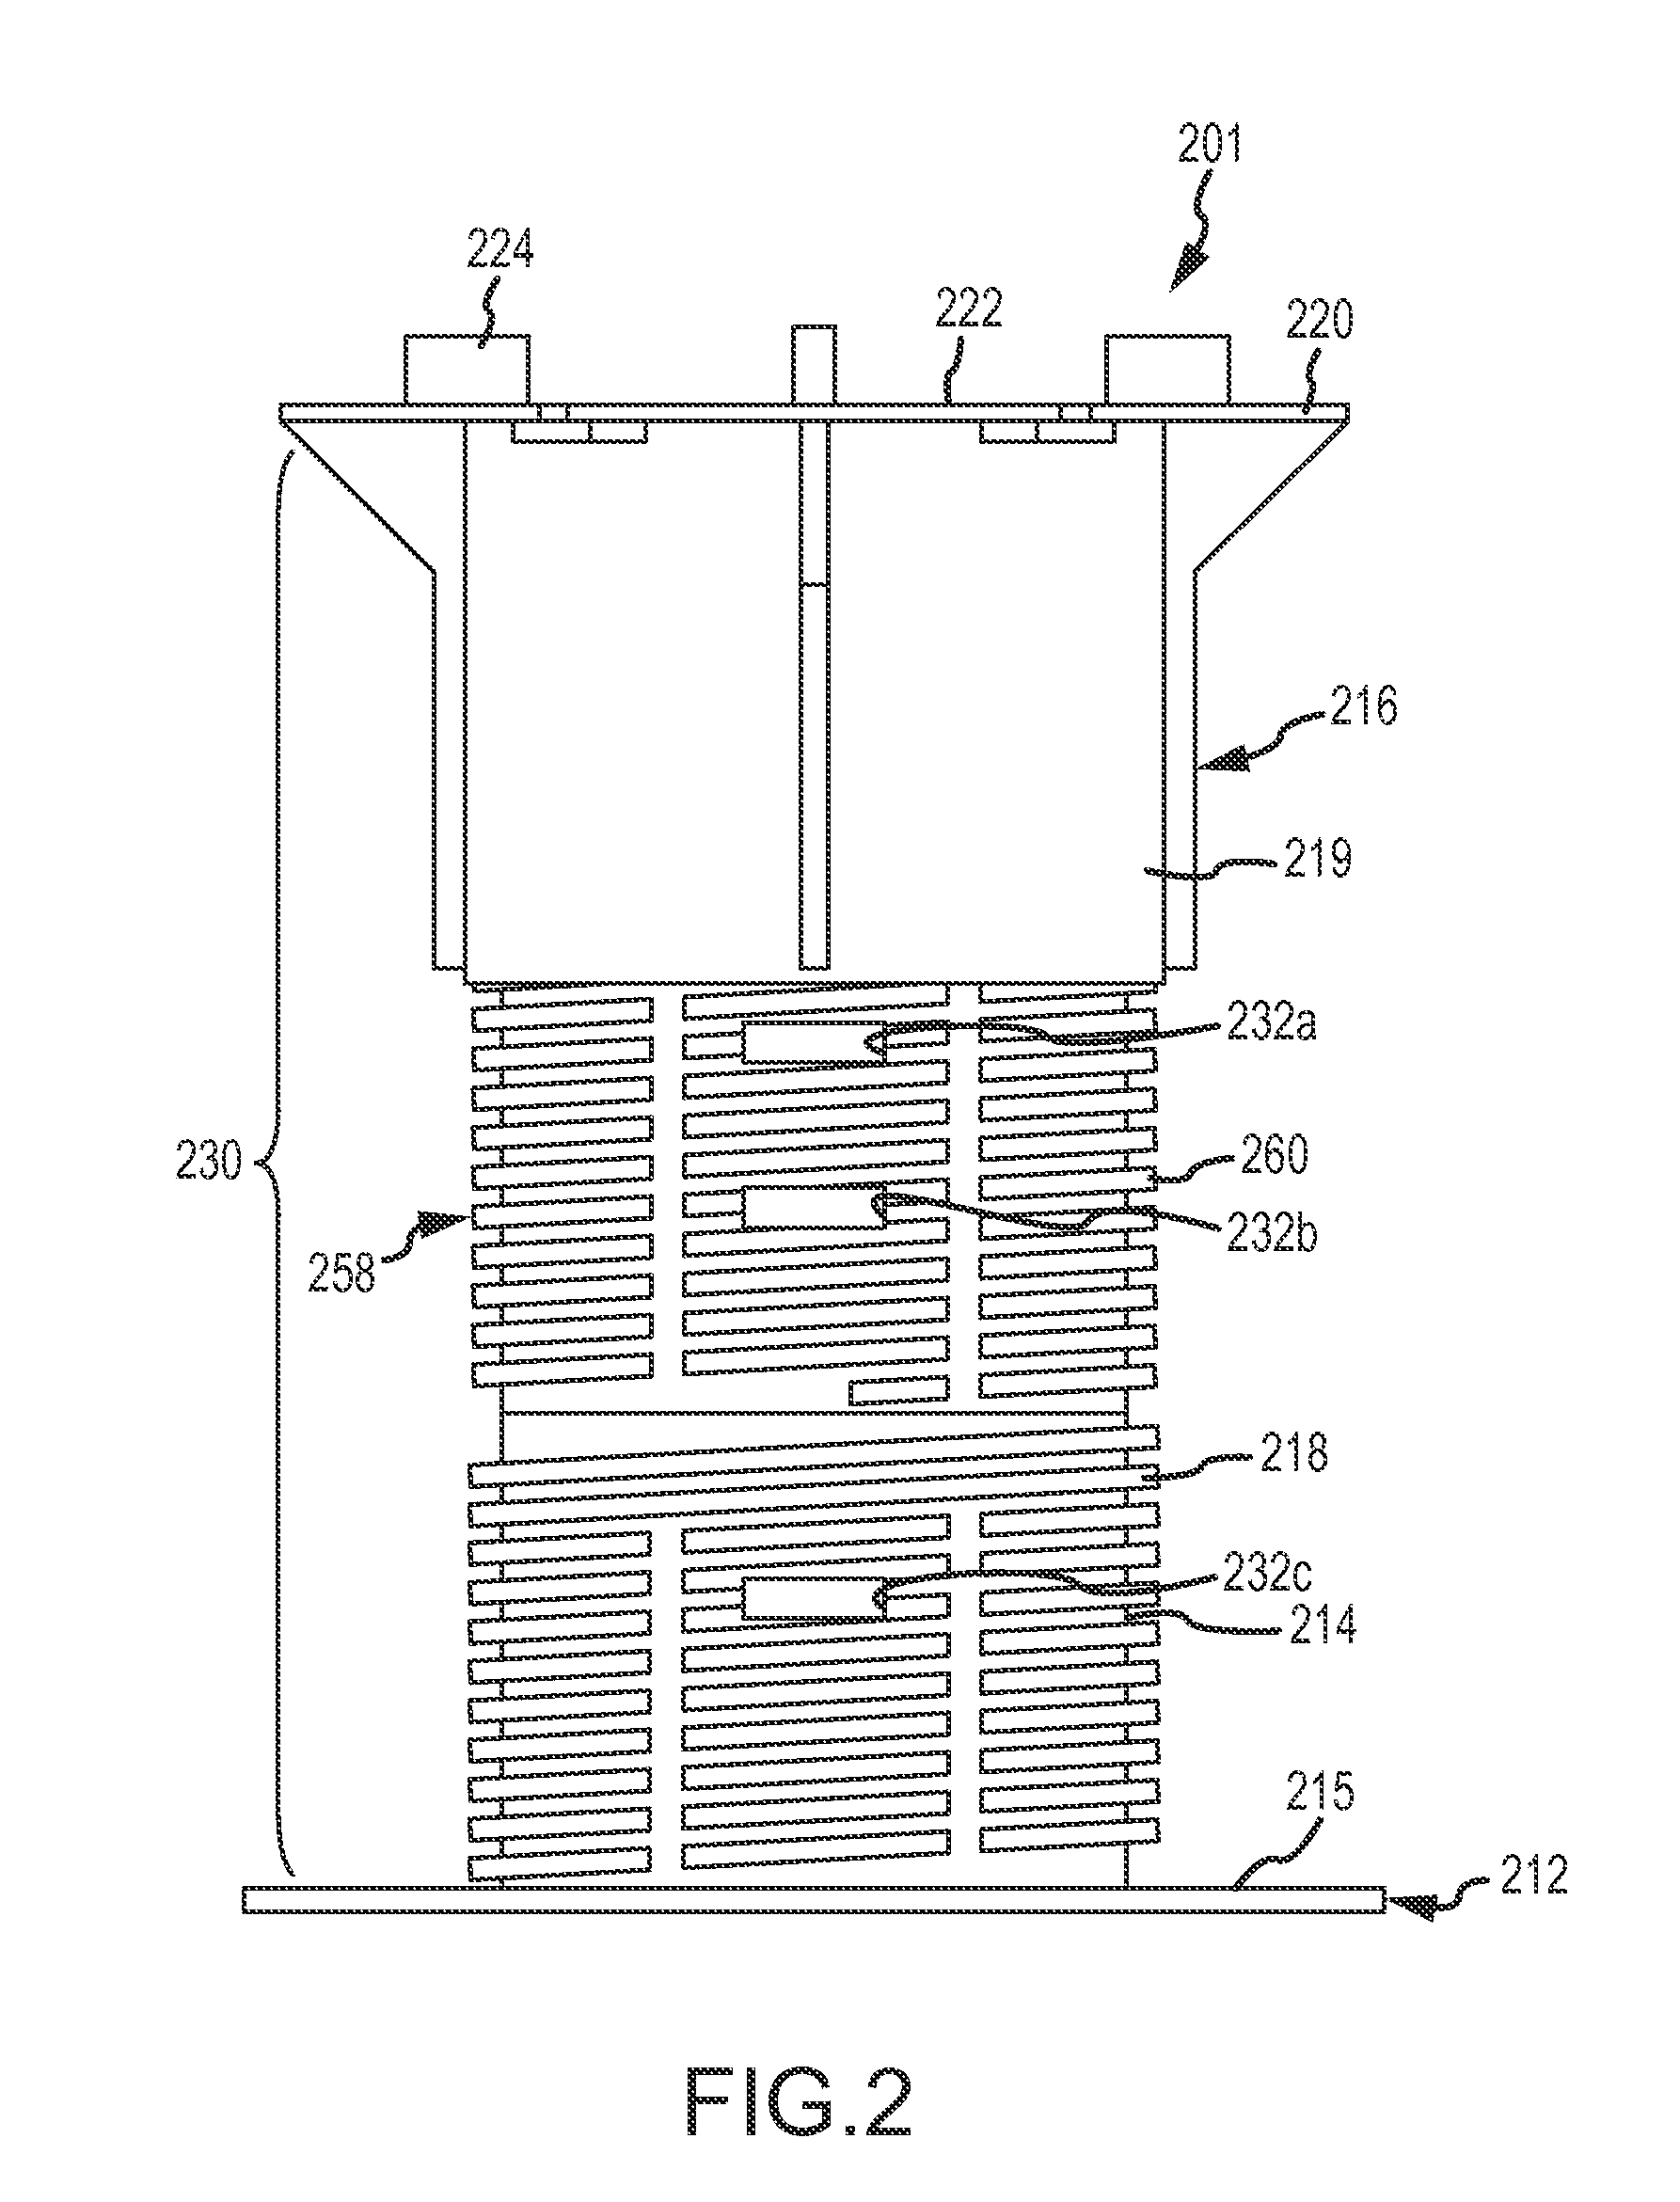 Field paver connector and restraining system